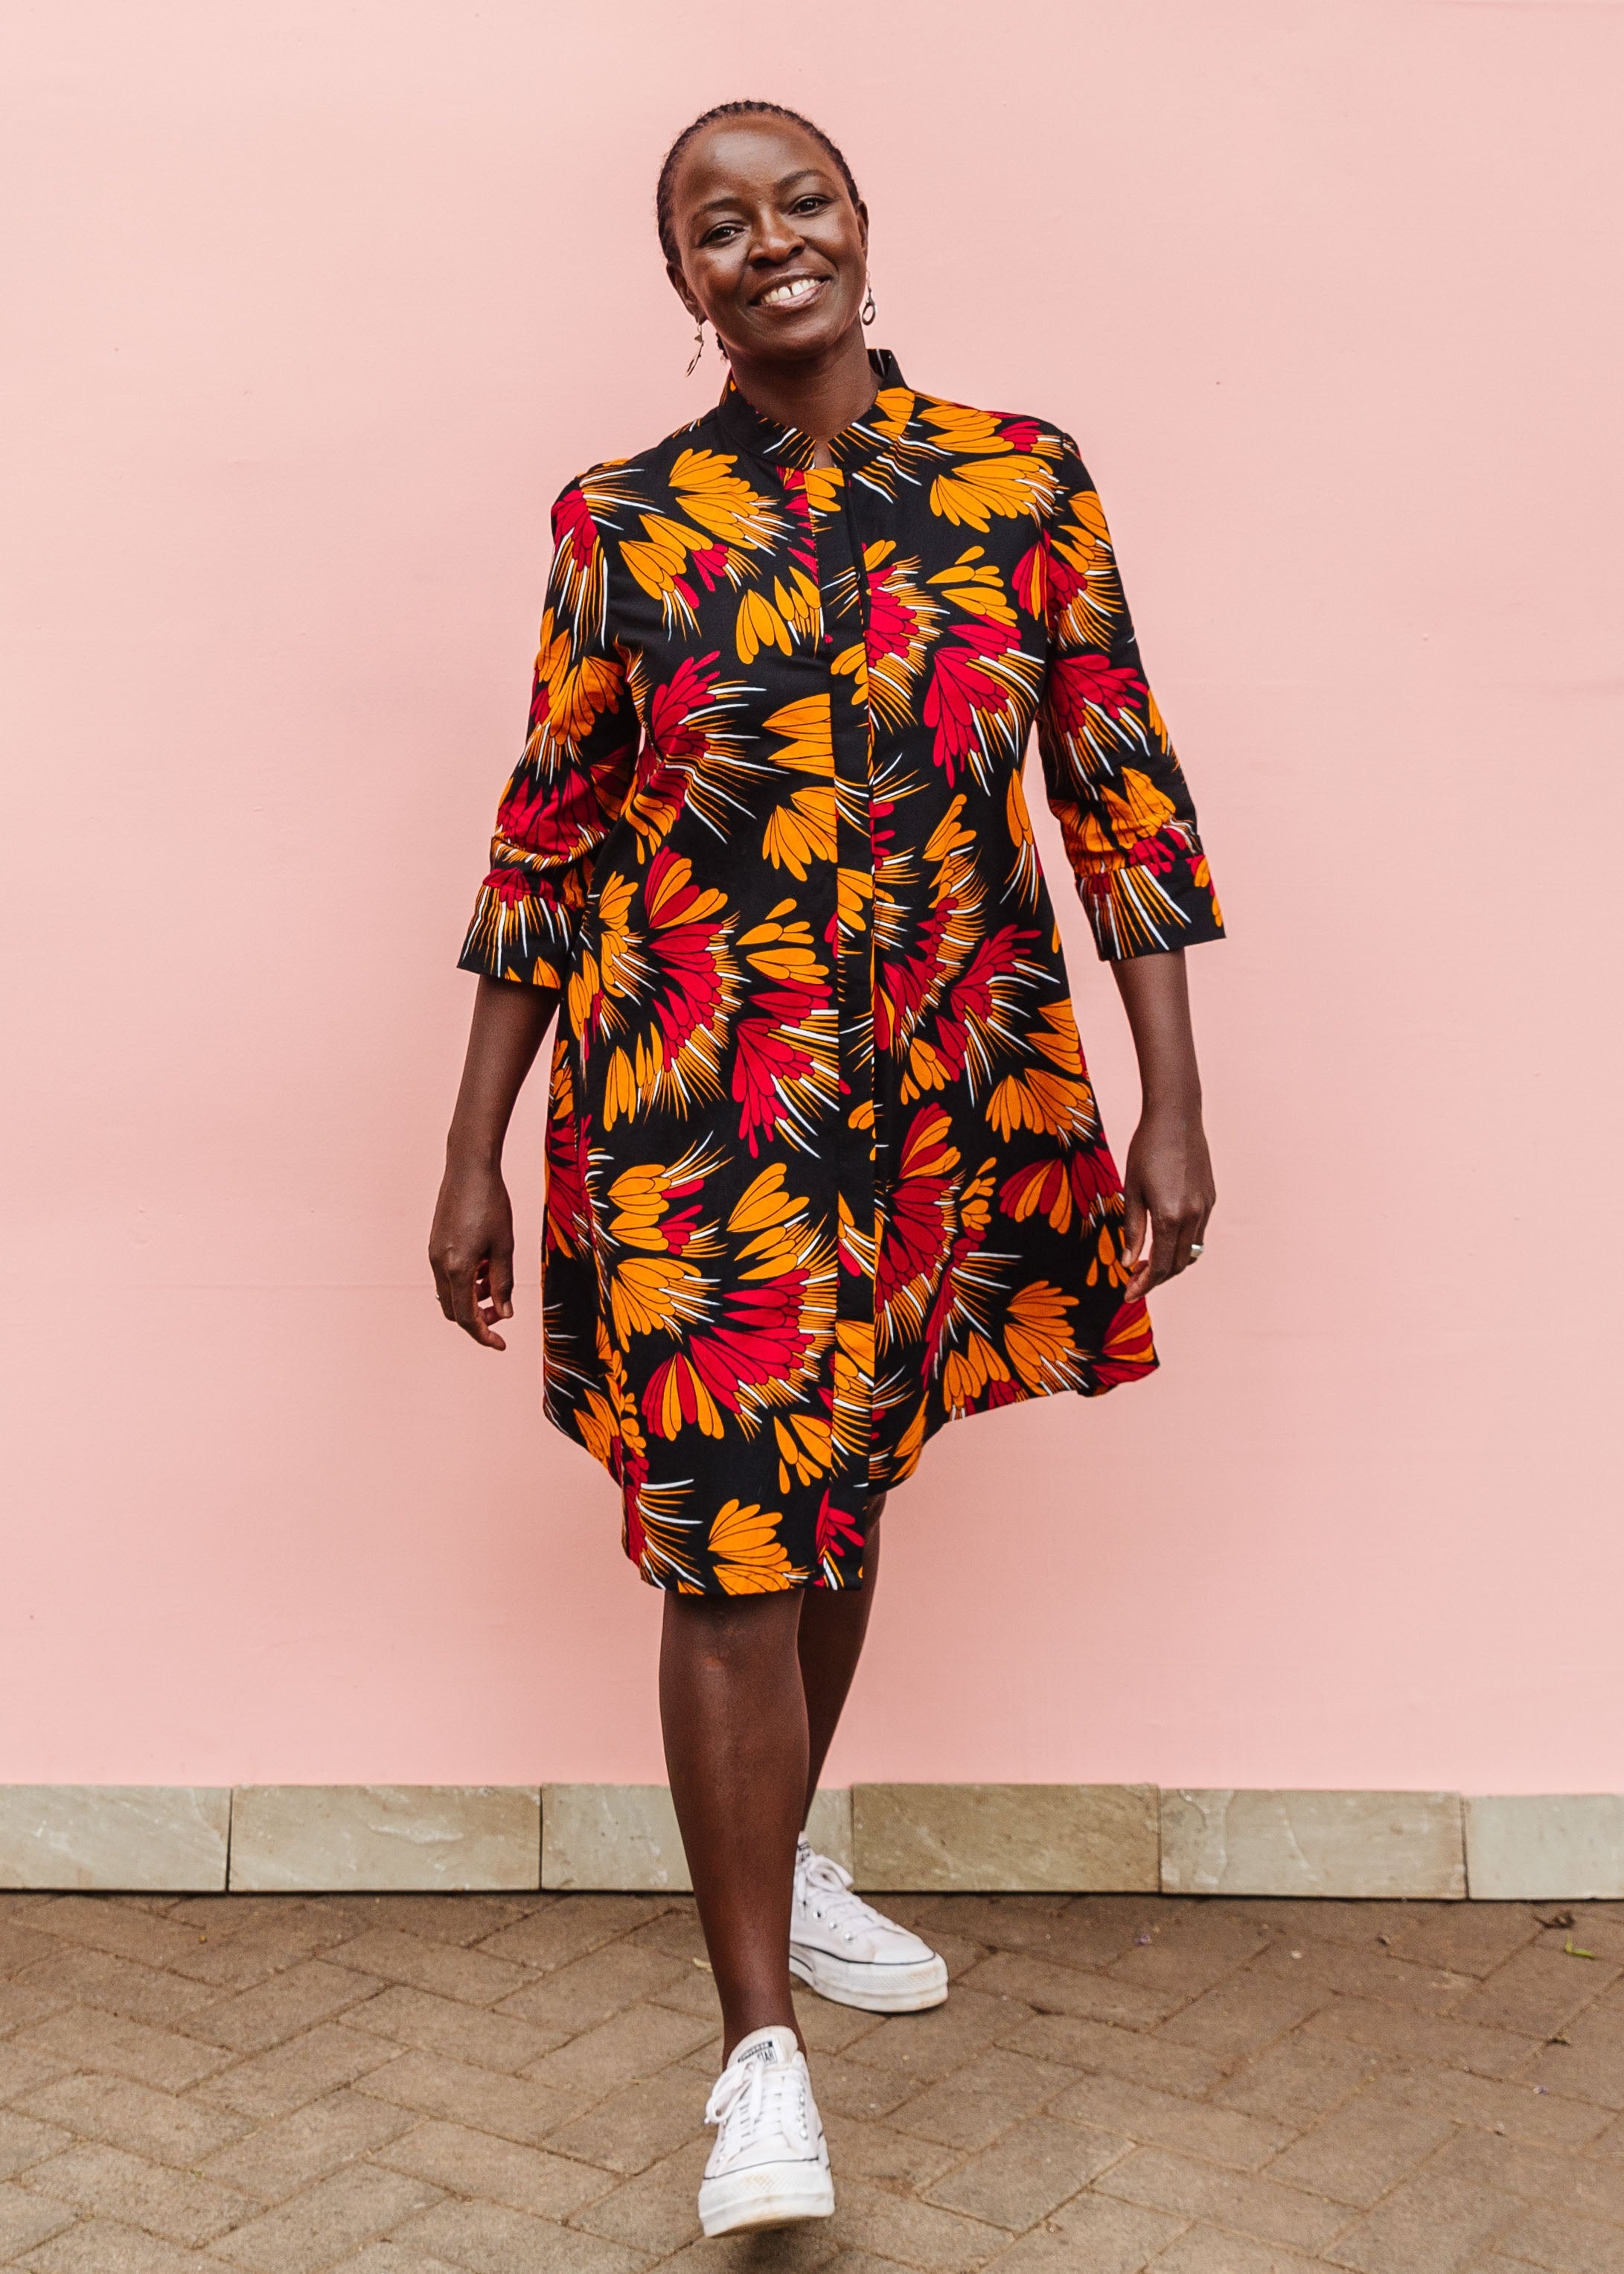 Model wearing black dress with orange, red and white floral print.